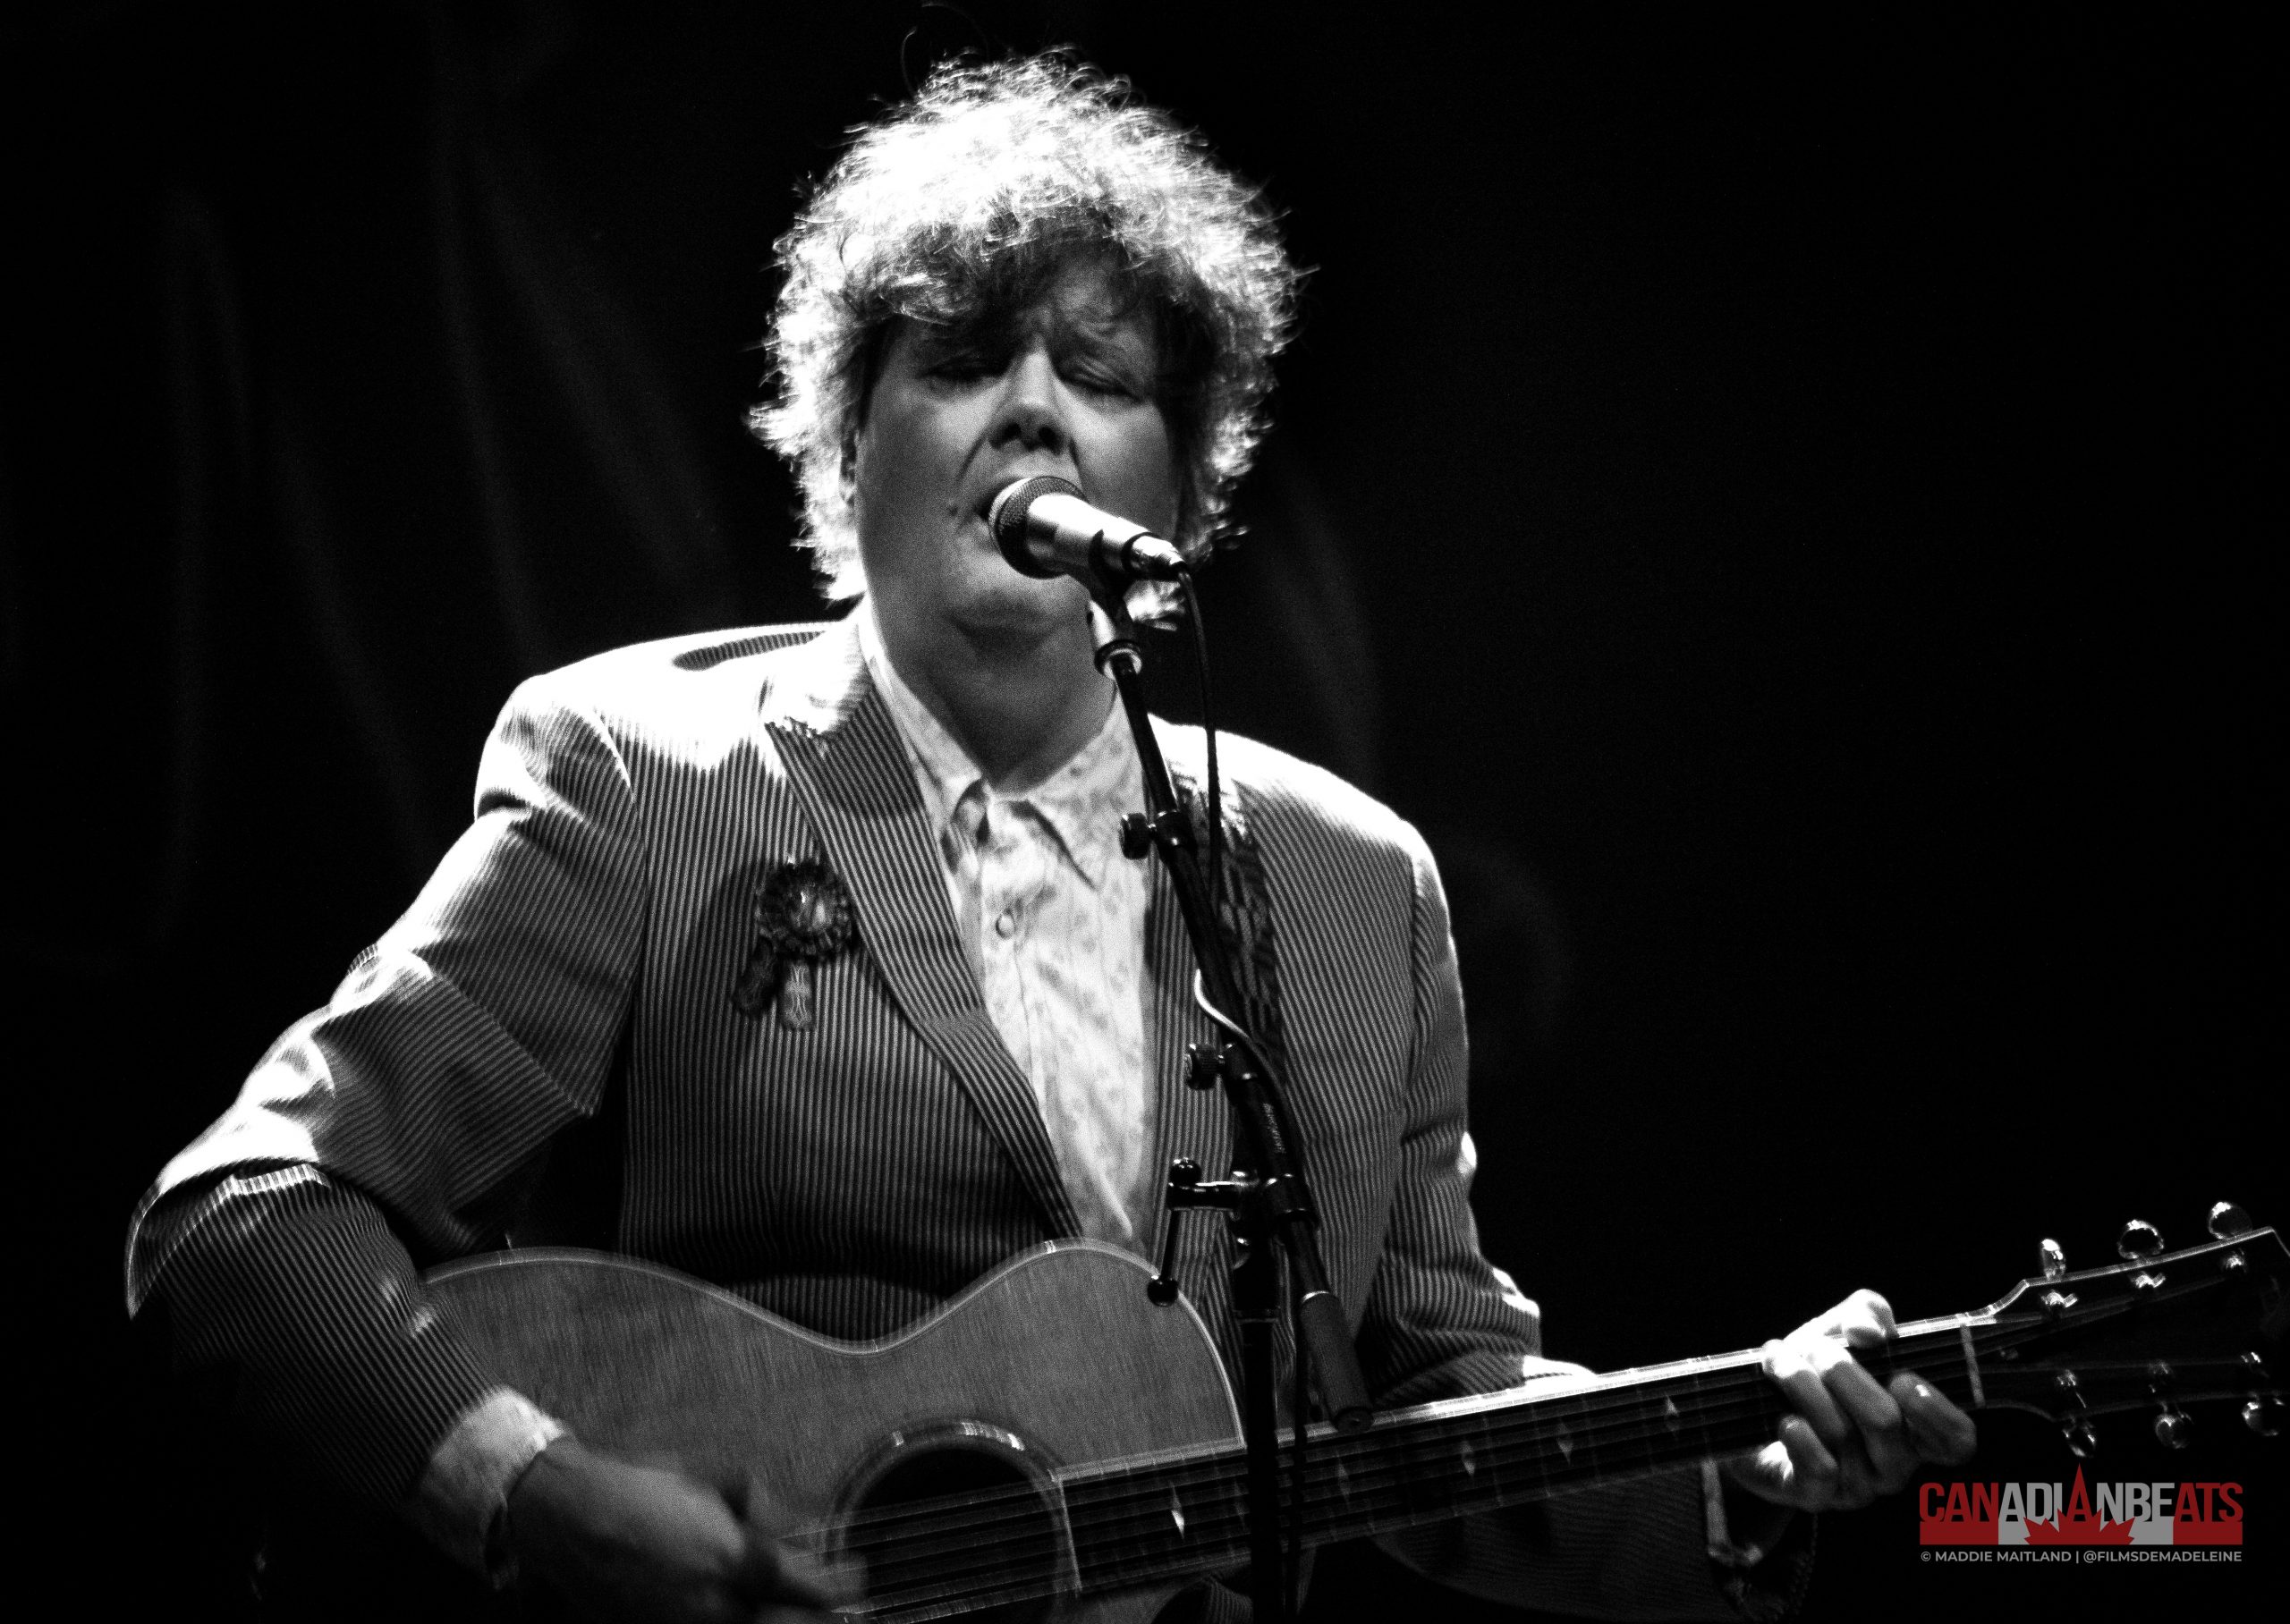 Ron Sexsmith - Glow In The Dark Stars - Official Audio 